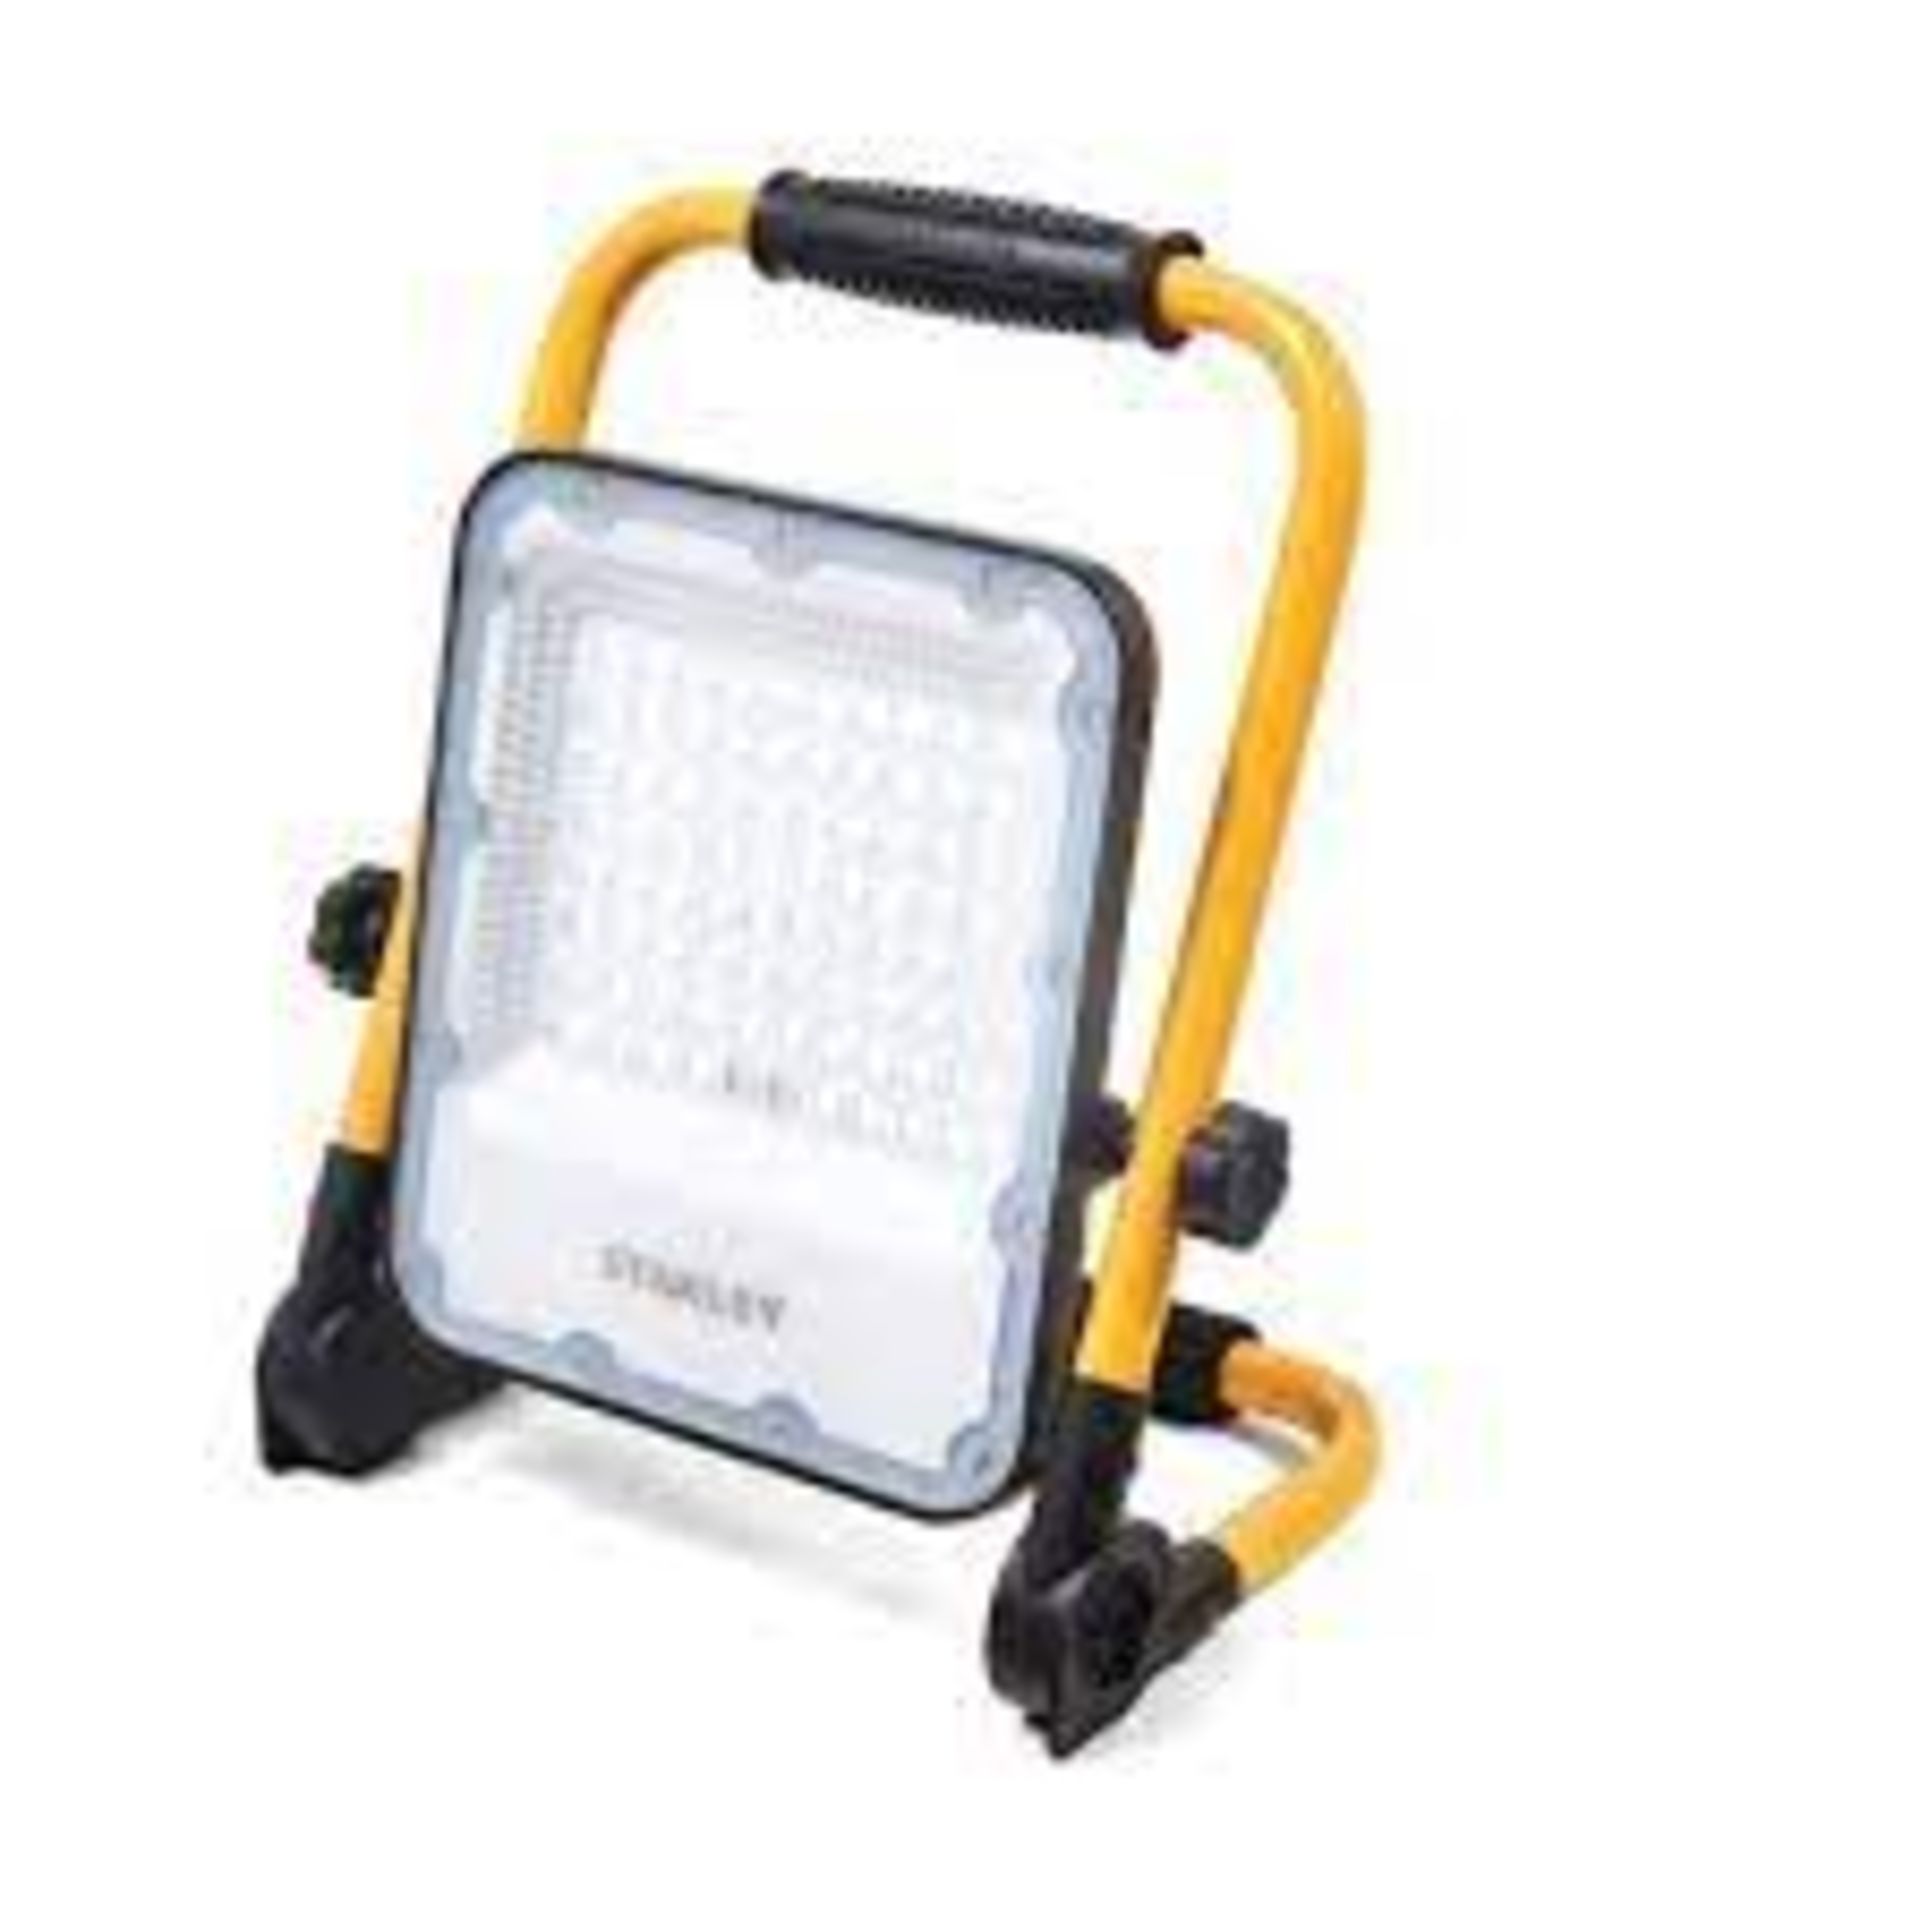 Stanley 30w Rechargeable LED Worklight - SR4